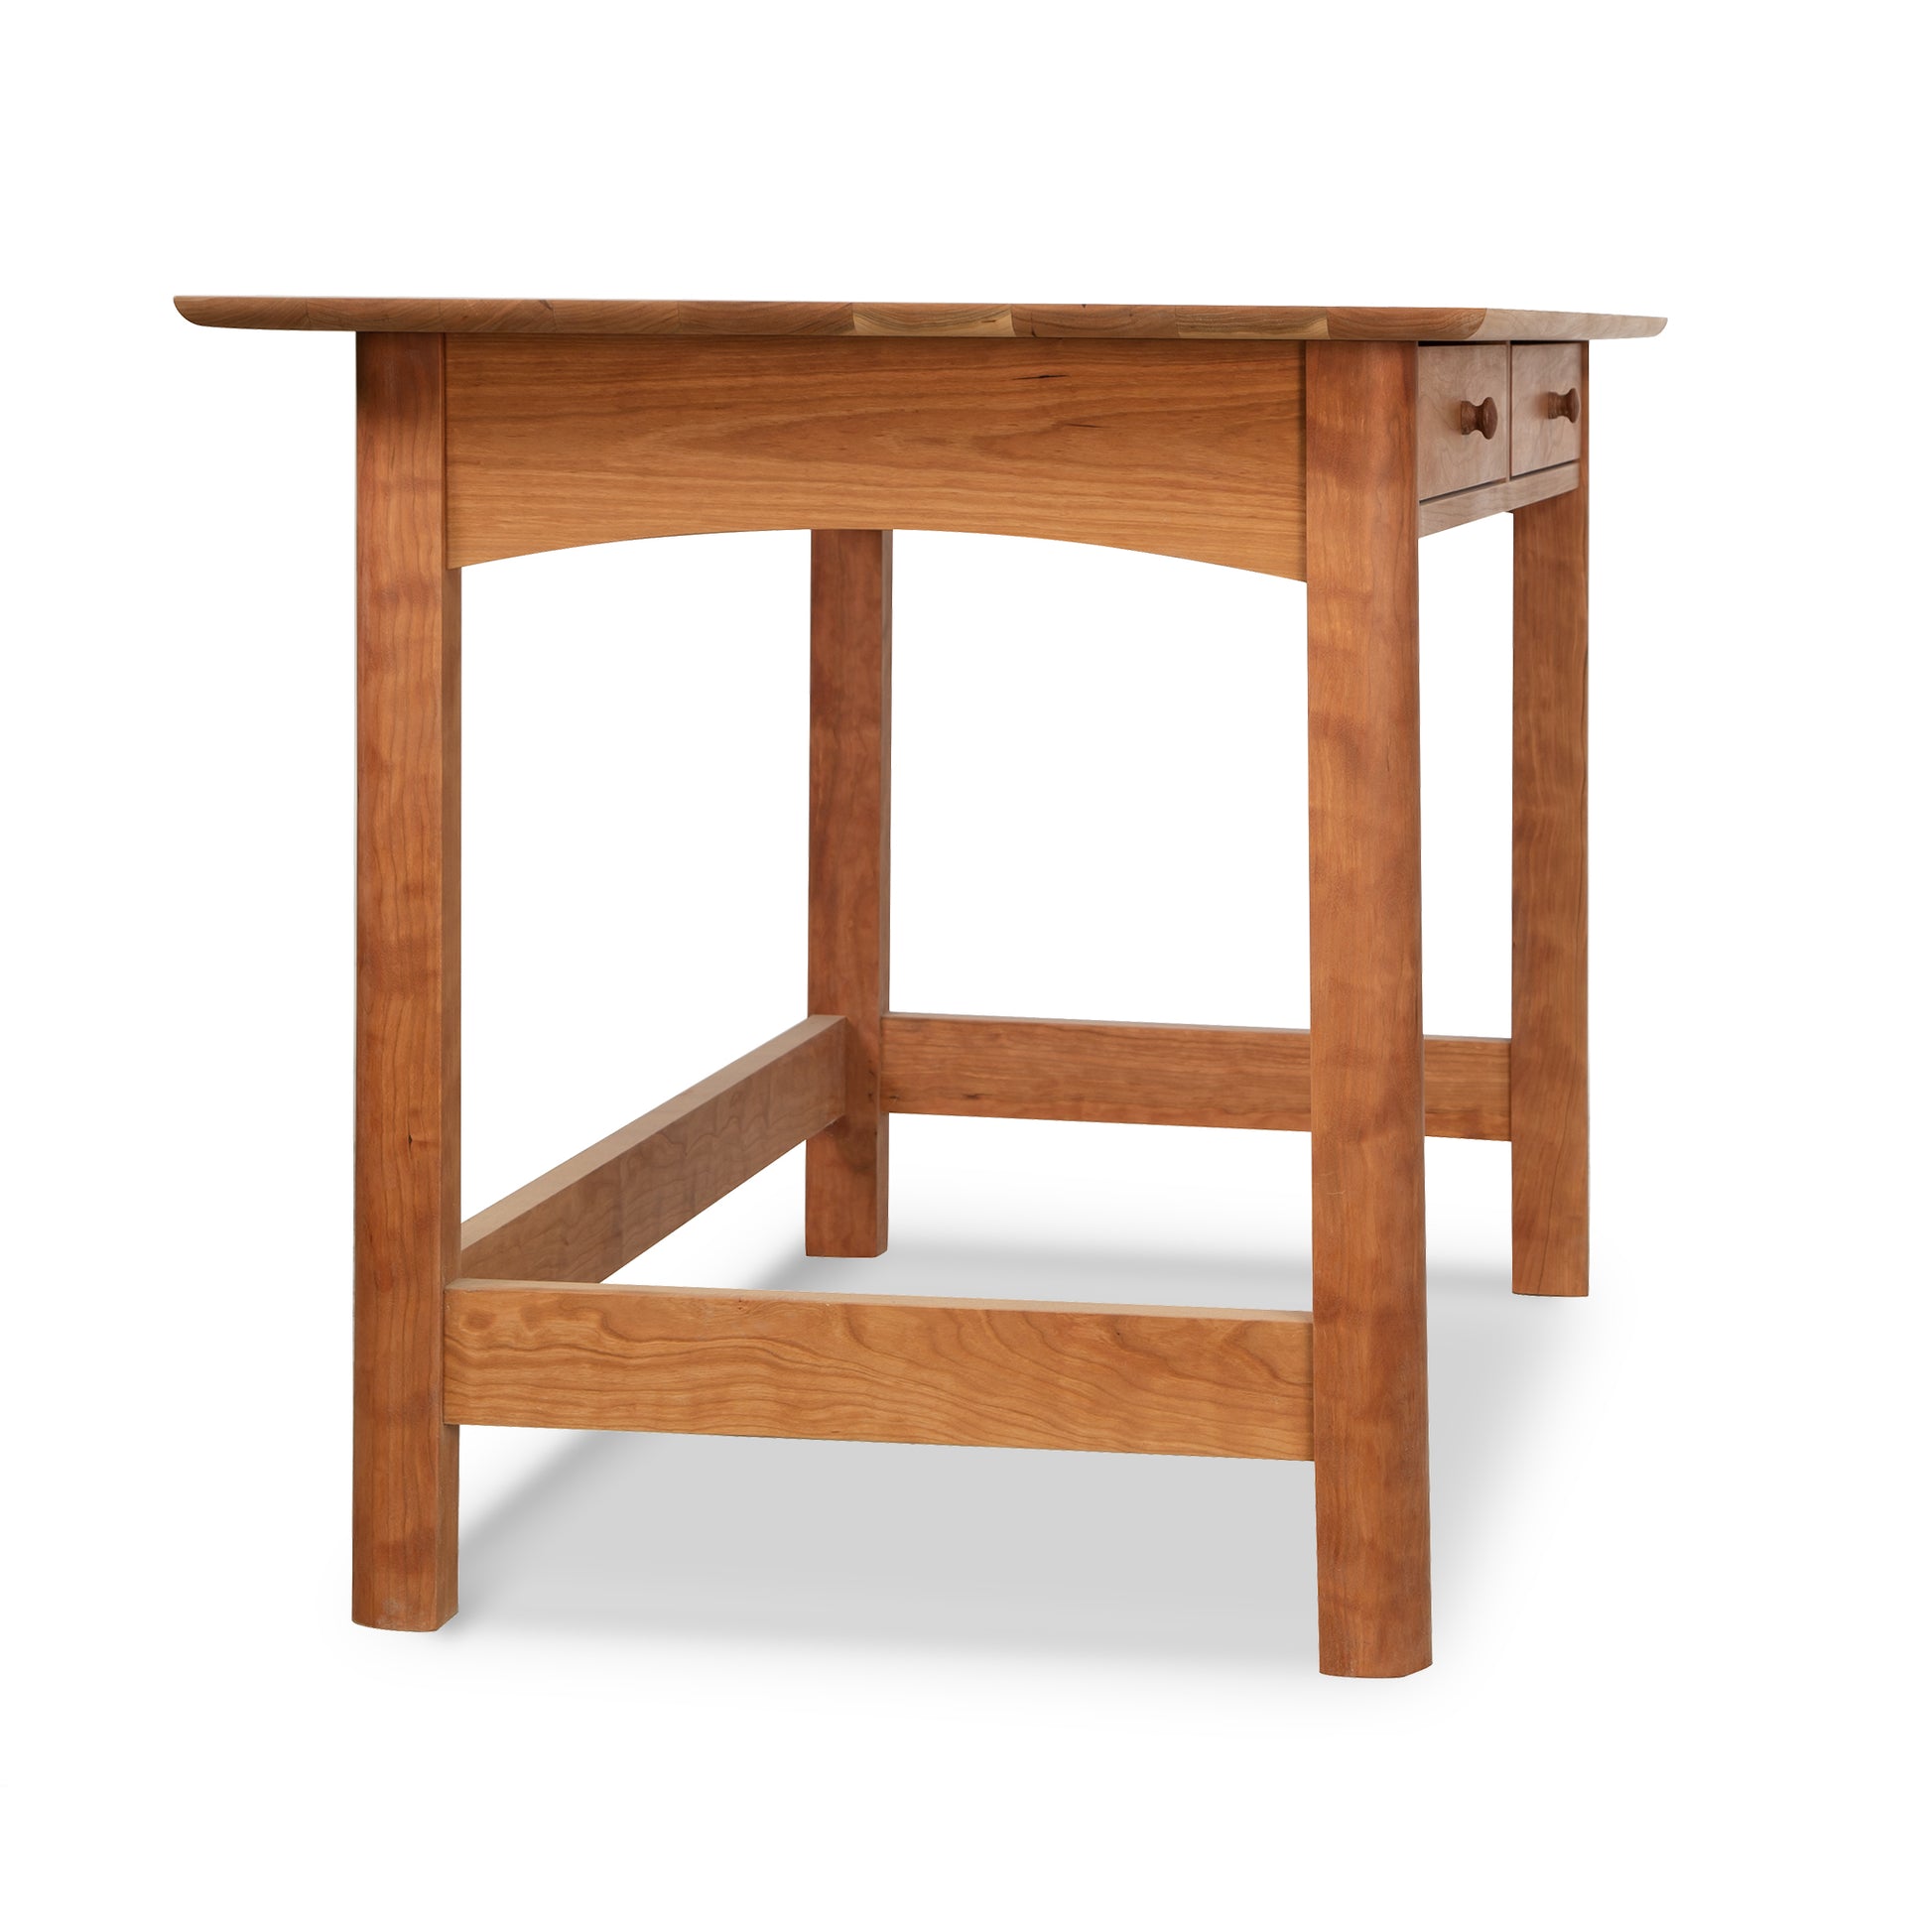 A Heartwood Shaker Writing Desk by Vermont Furniture Designs, featuring a rectangular top and four legs, isolated on a white background.